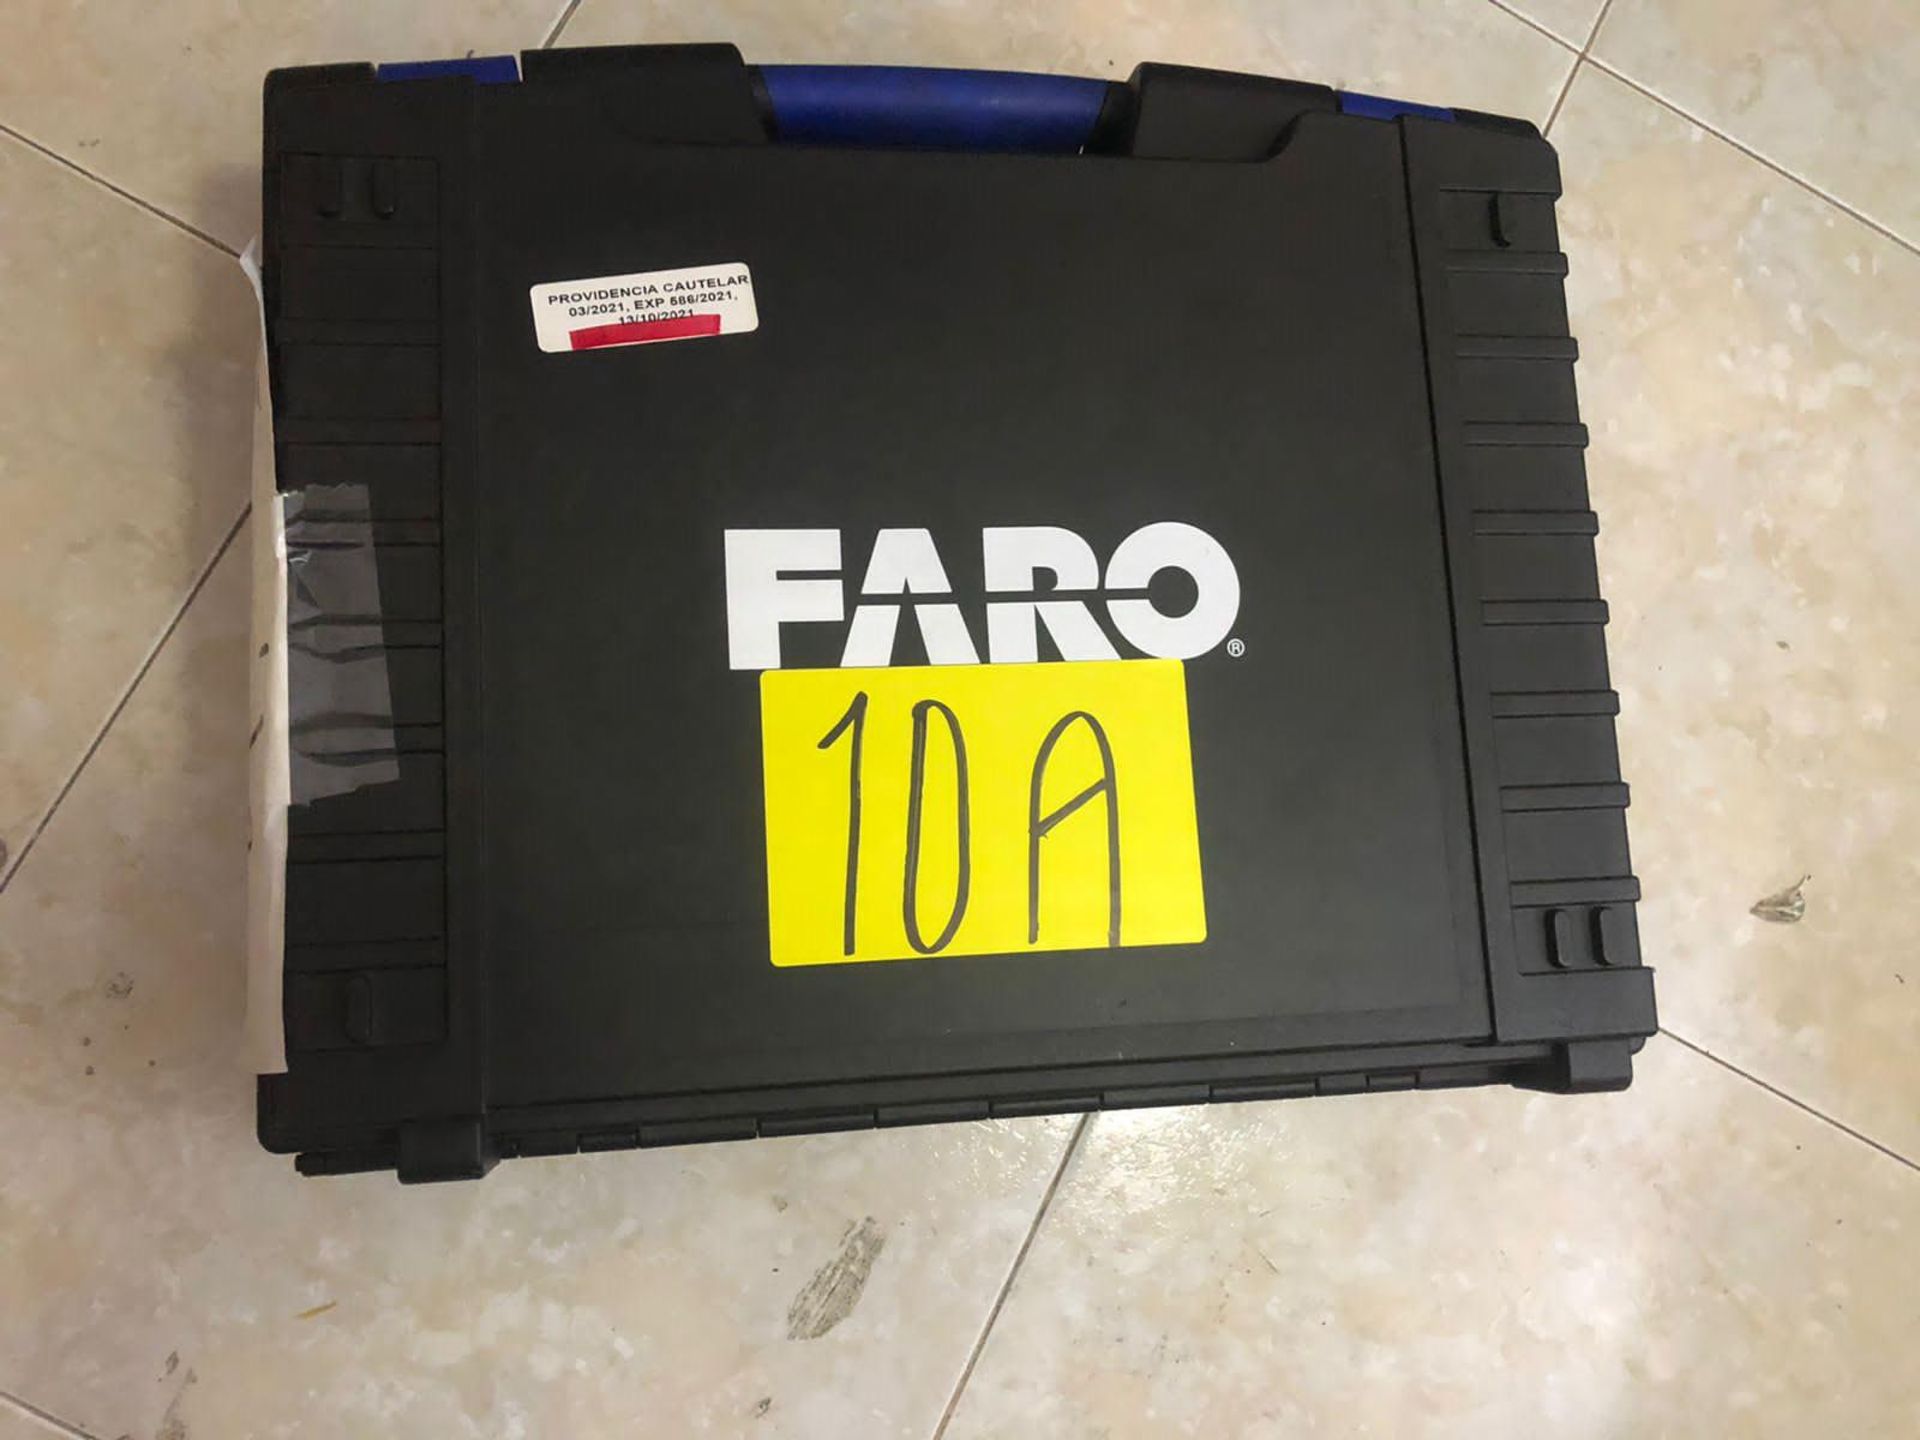 2012 FARO Coordinate measuring device with accessories and mobile base, Model EDGE - Image 10 of 24